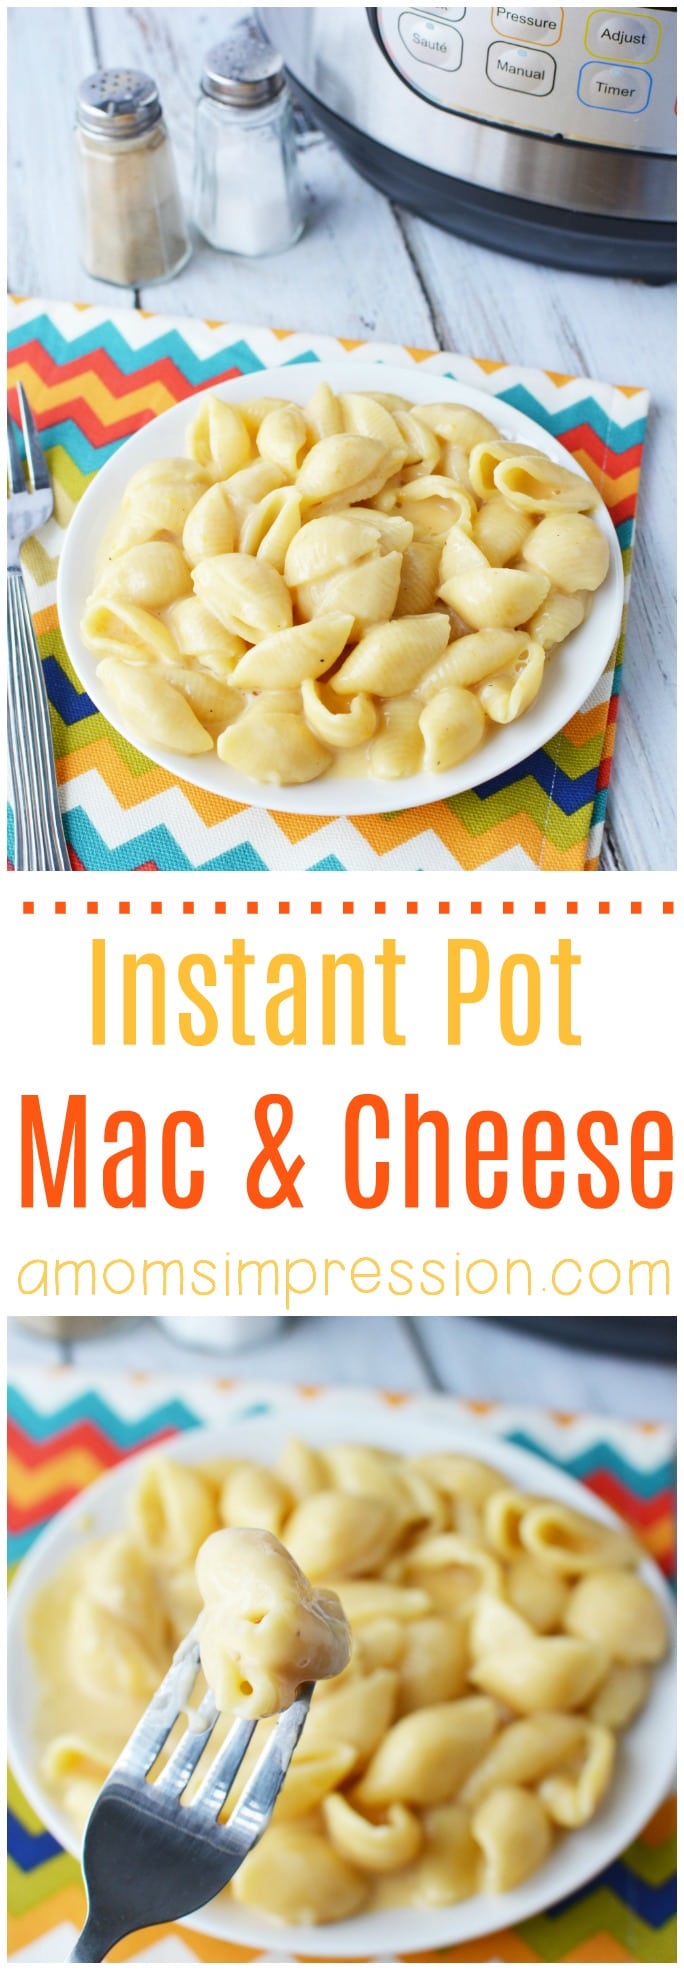 Instant Pot macaroni and cheese recipe